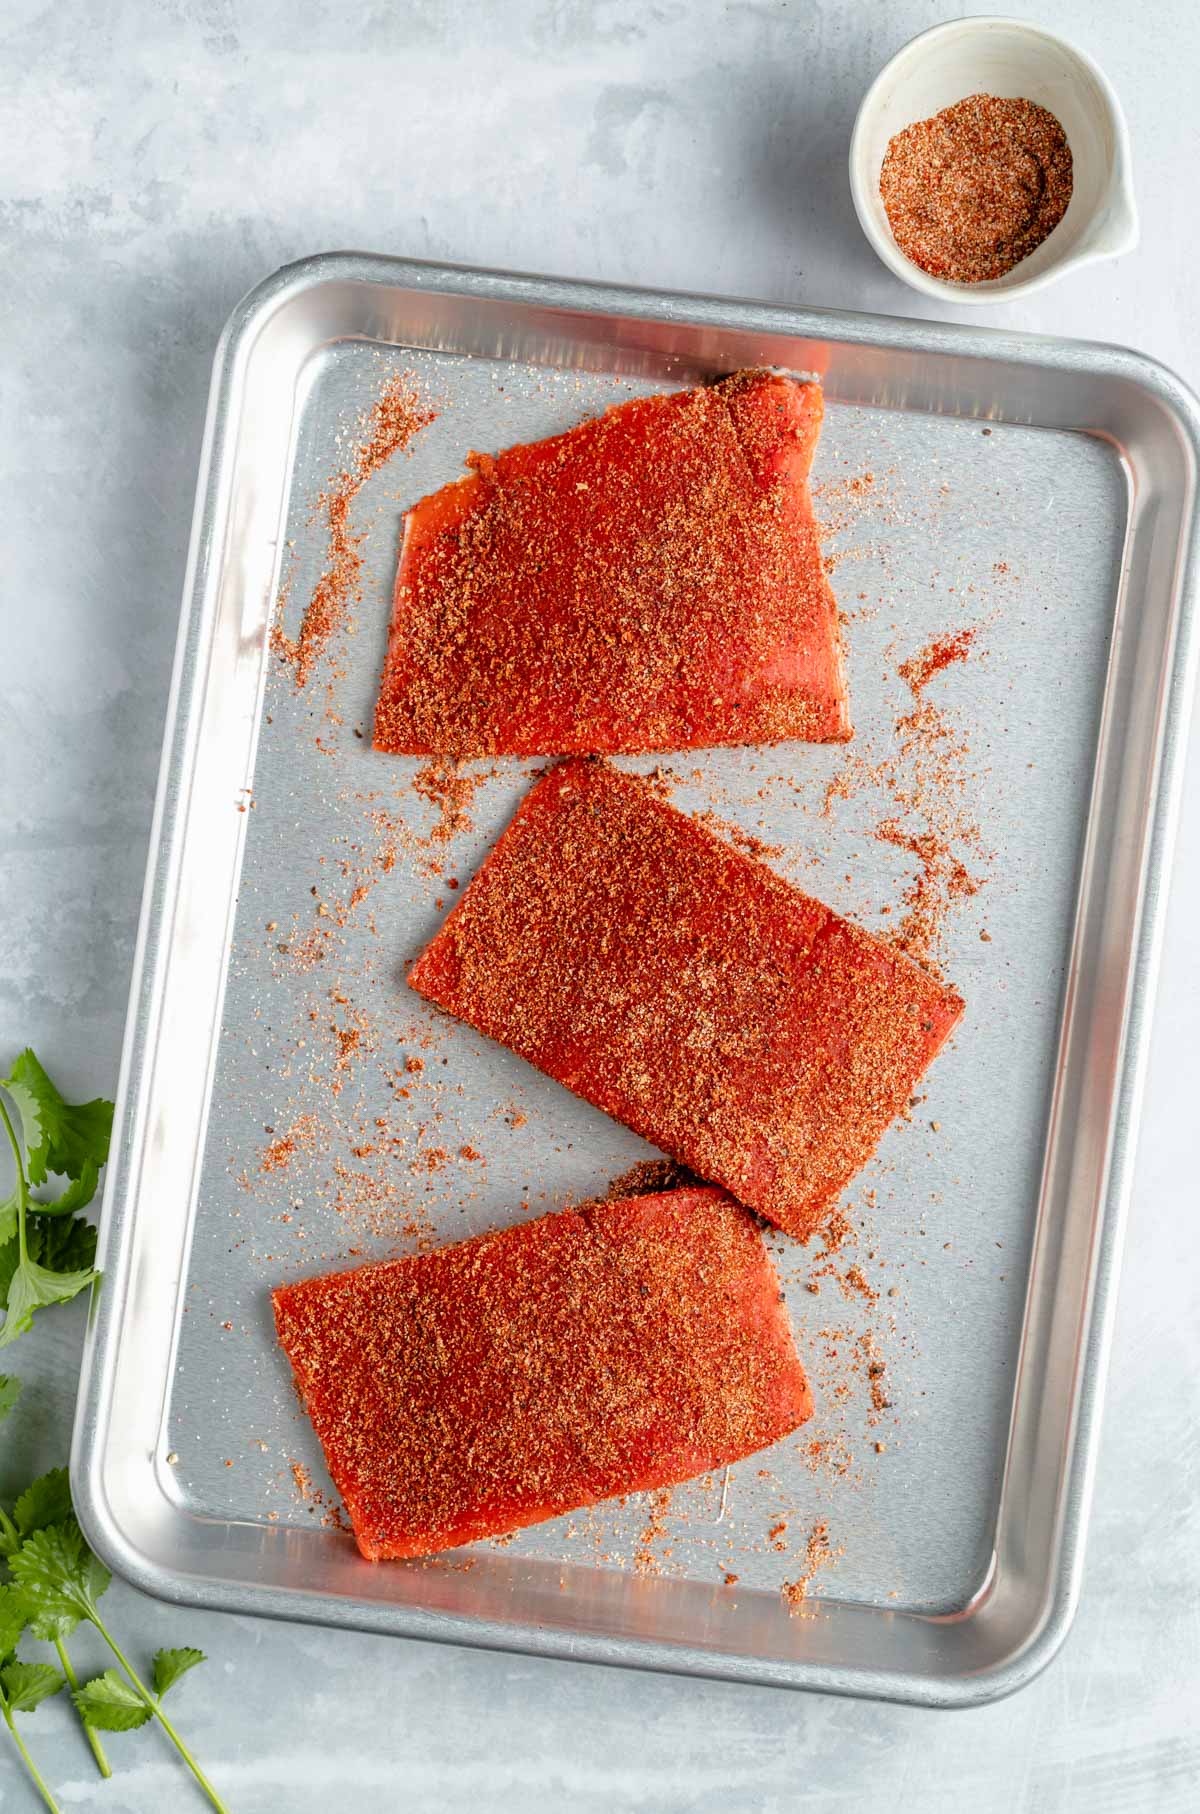 Raw salmon seasoned with spices